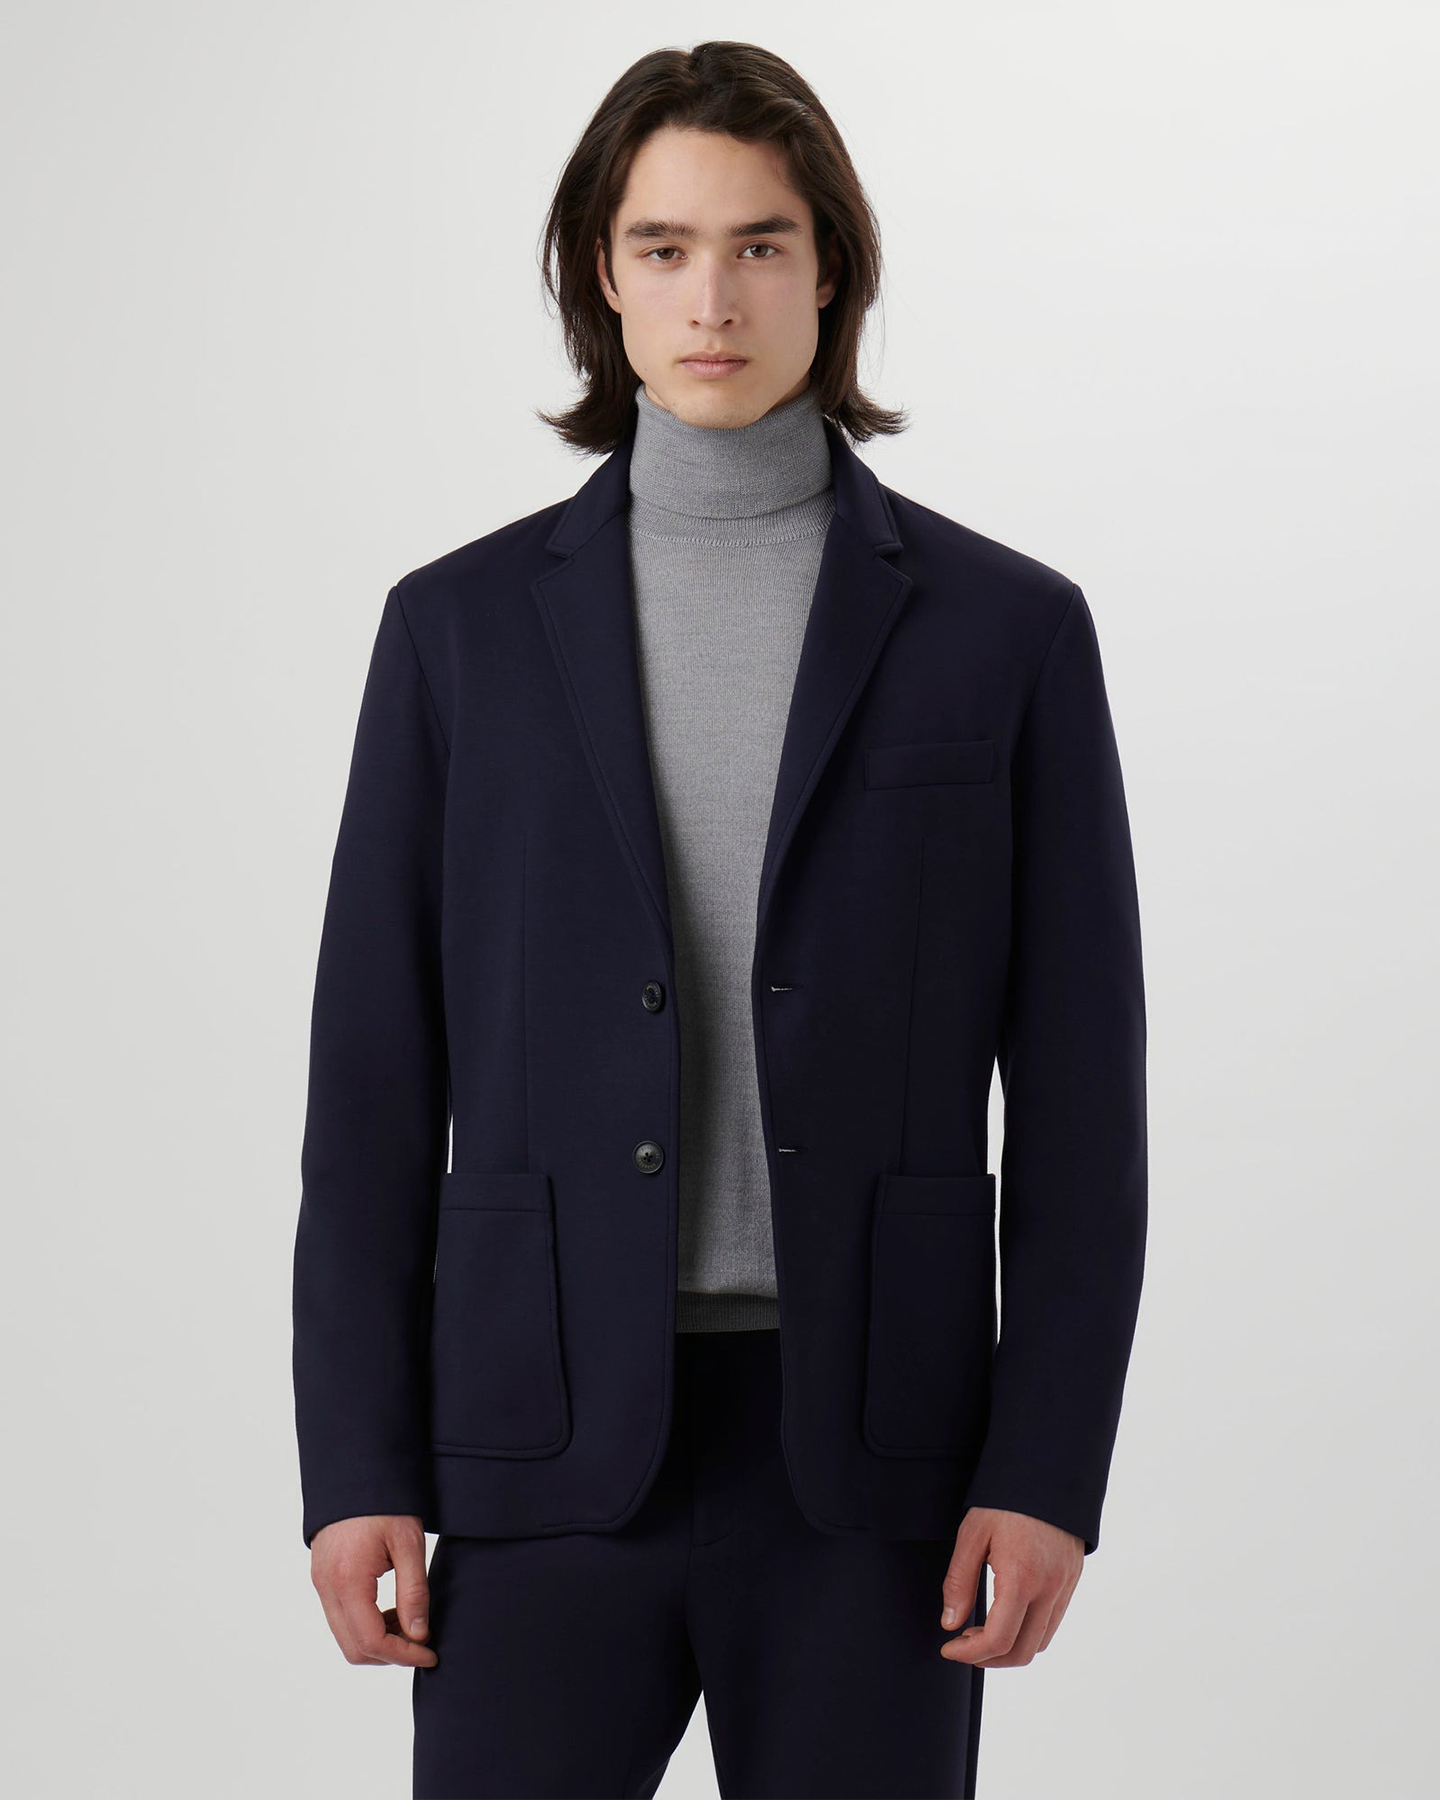 TWO BUTTON SOFT TOUCH BLAZER - NAVY